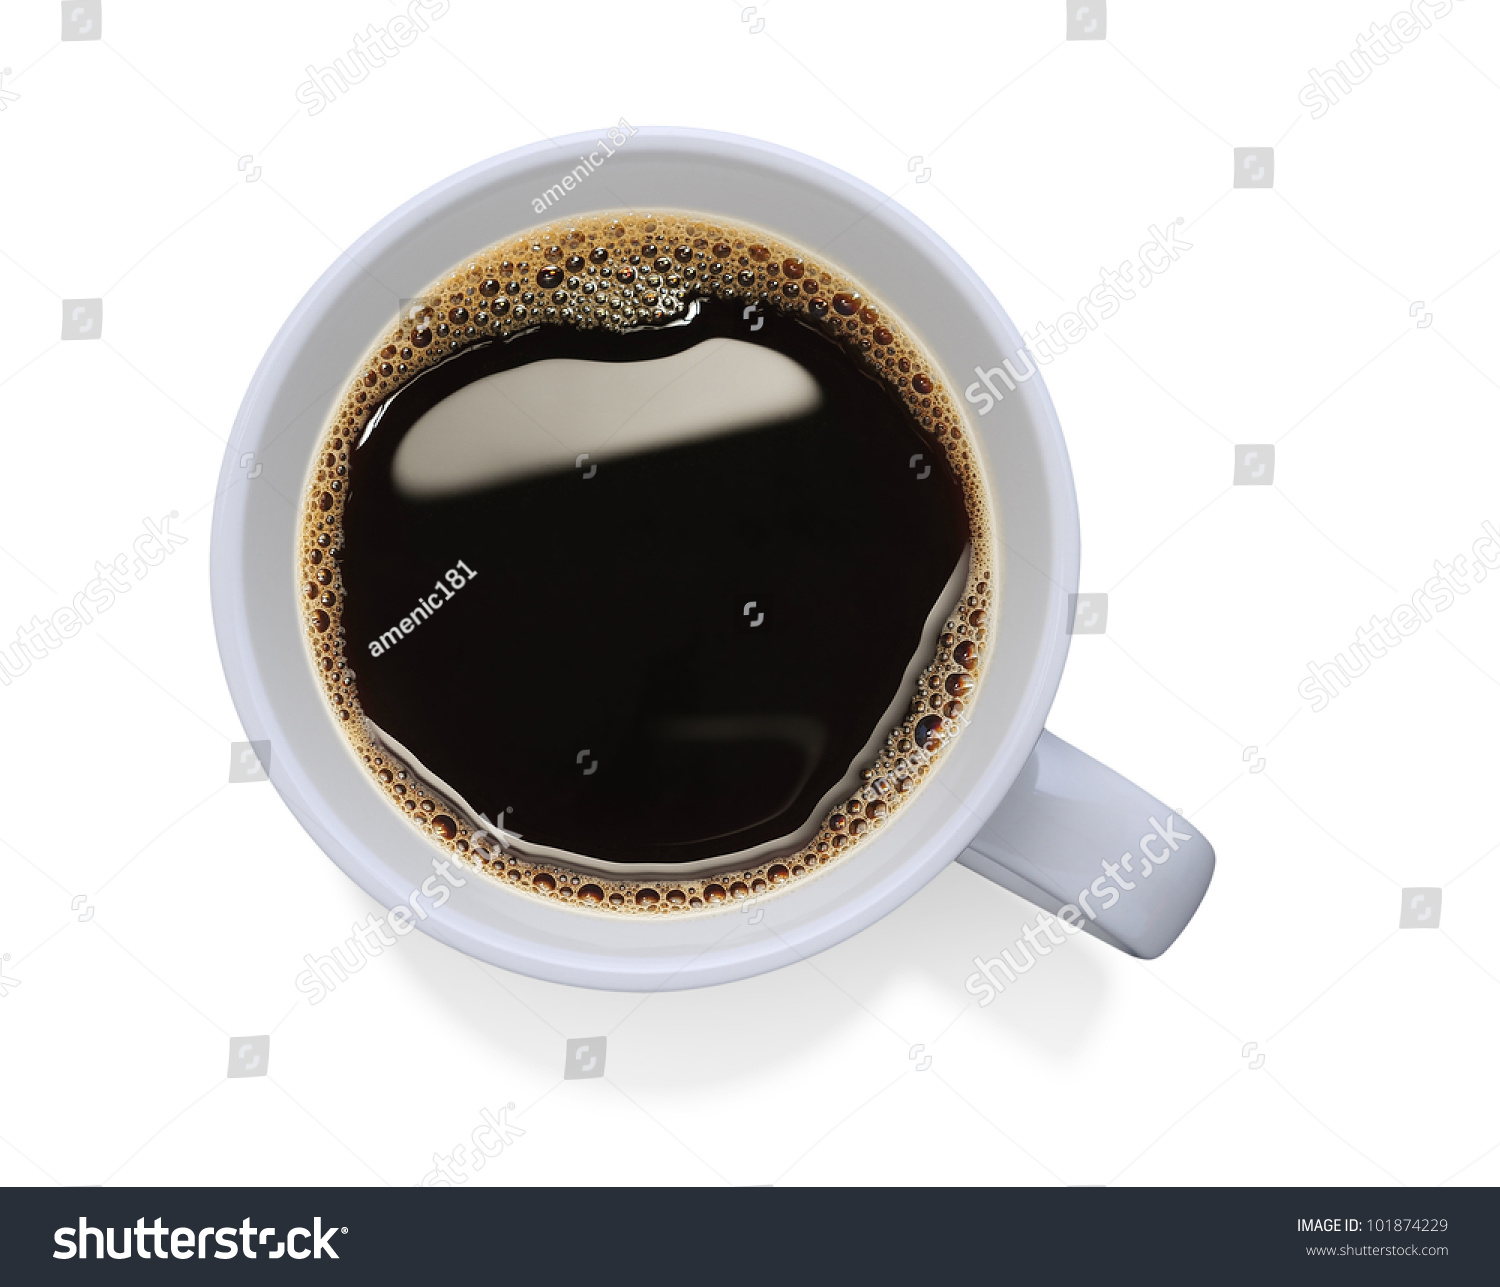 Top view of a cup of coffee, isolate on white #101874229